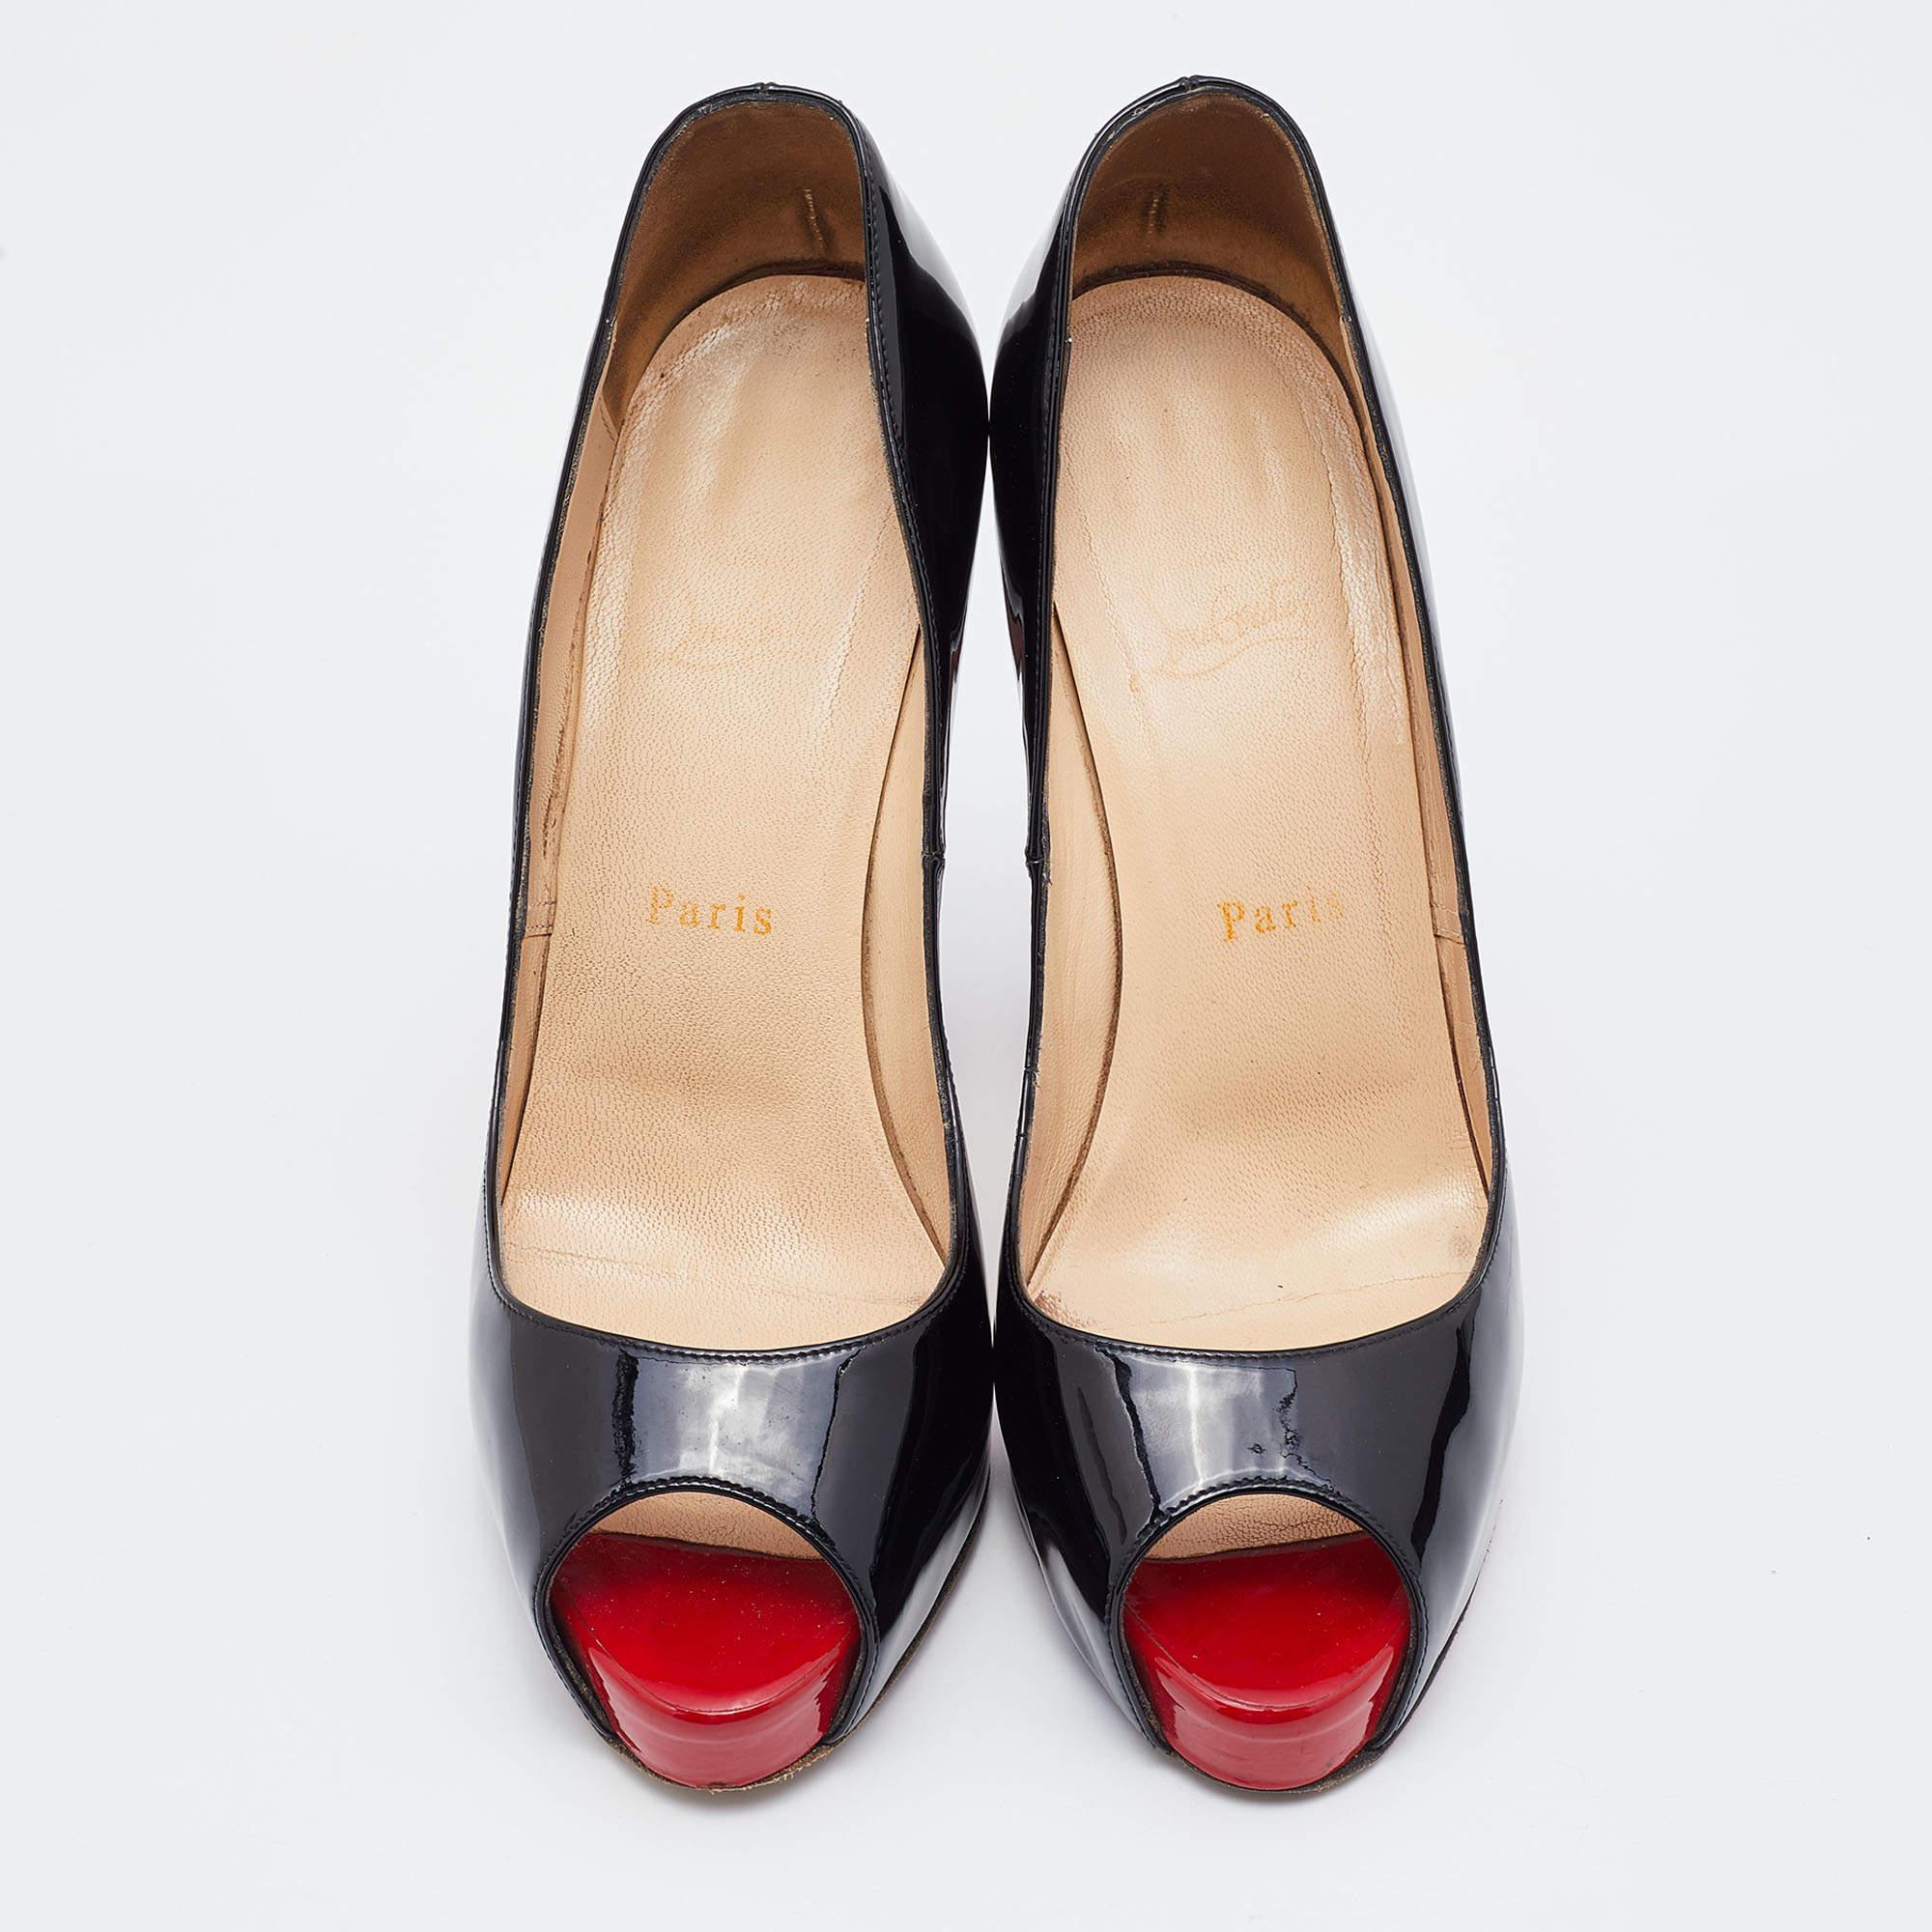 Stride through the day with confidence by adorning this pair of Christian Louboutin pumps. Created from patent leather, its well-designed curves will elegantly outline your feet. The 12.5cm heels and platforms of these peep-toe shoes will take your